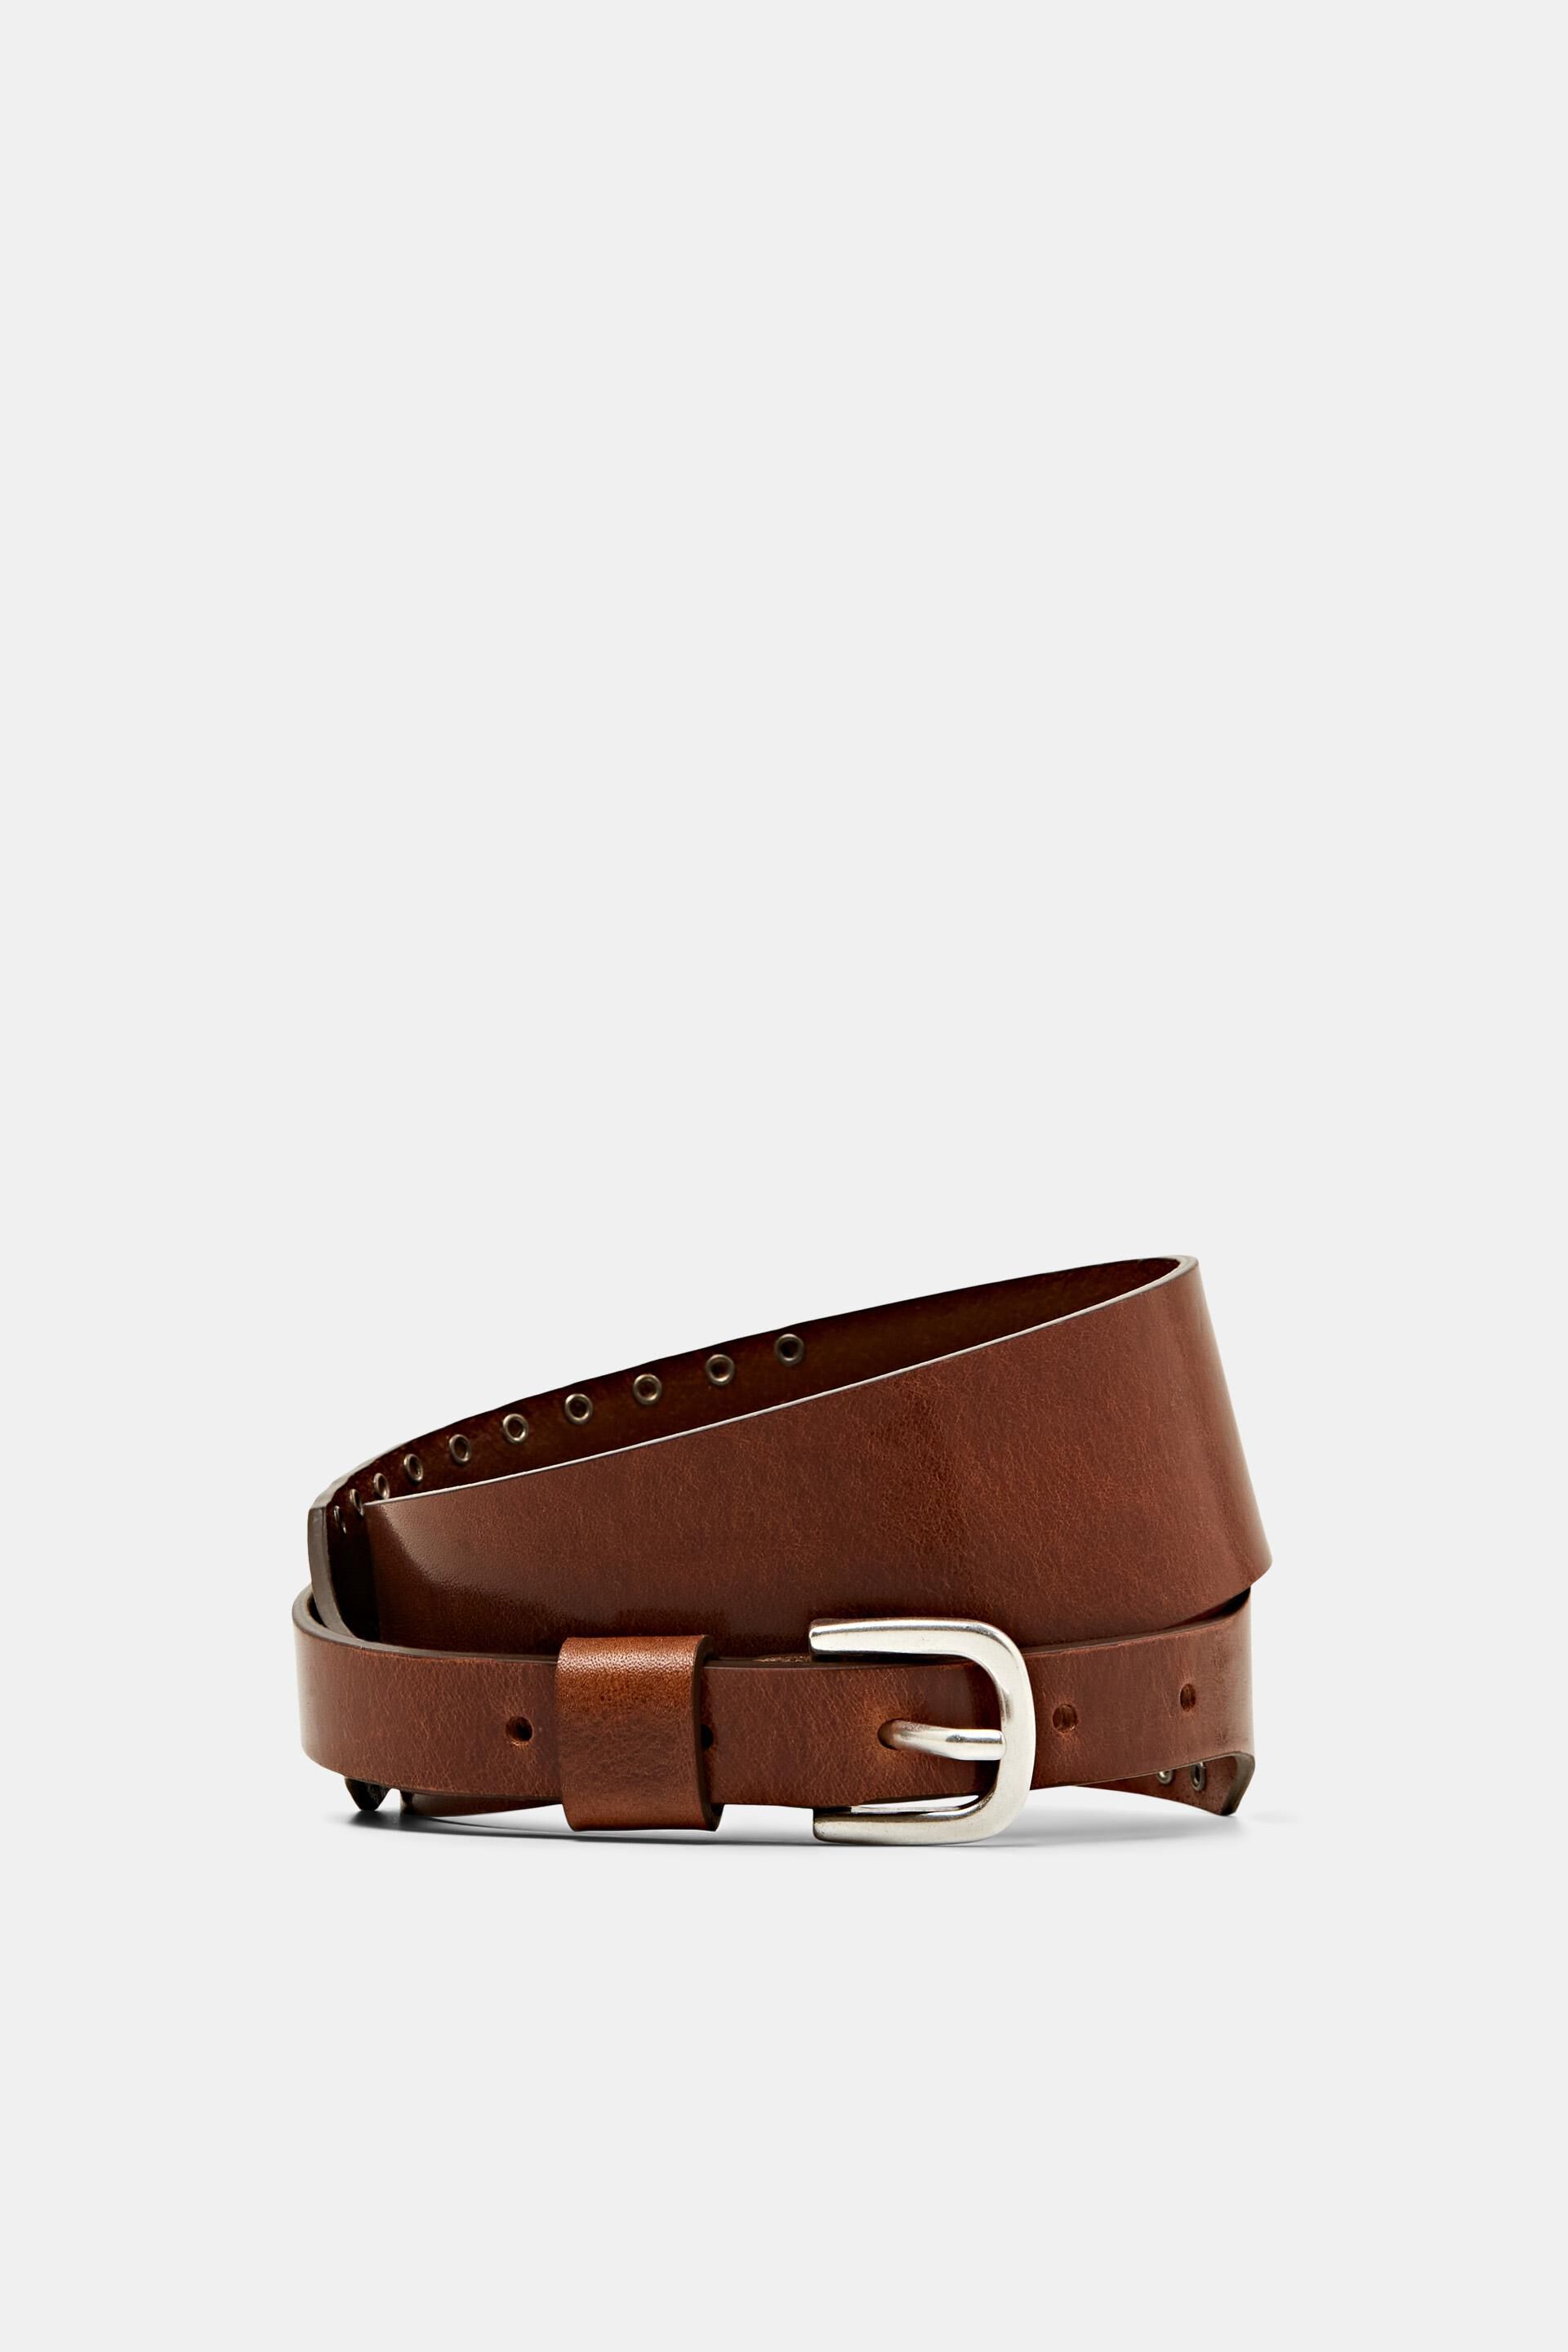 Esprit Online Store Waist belt with studs, 100% real leather